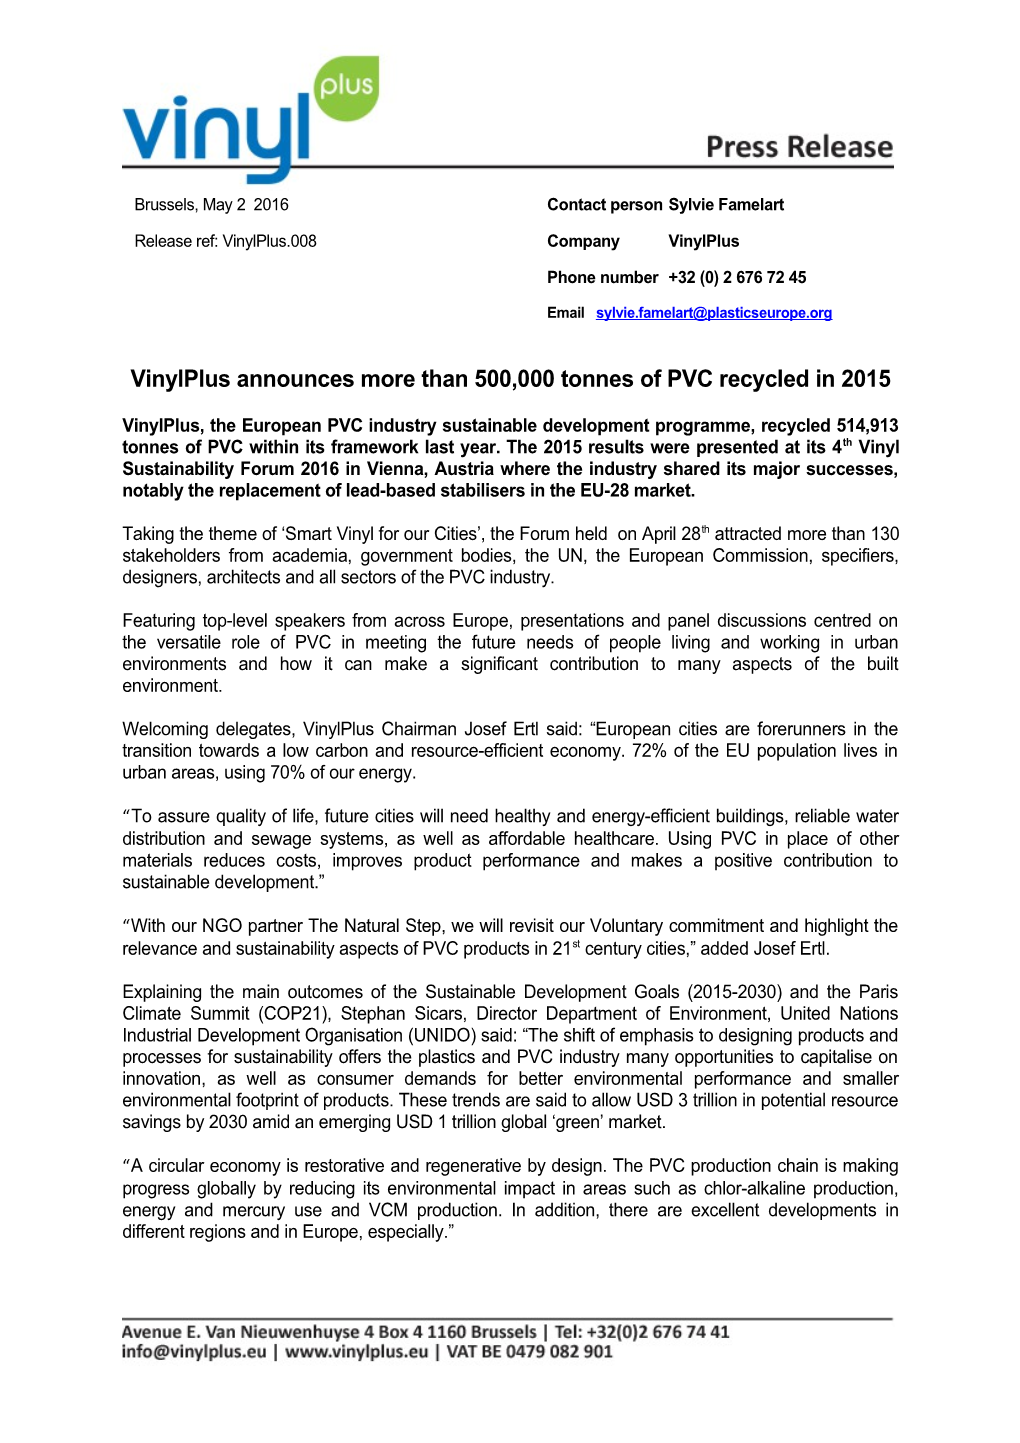 Vinylplus Announces More Than 500,000 Tonnes of PVC Recycled in 2015